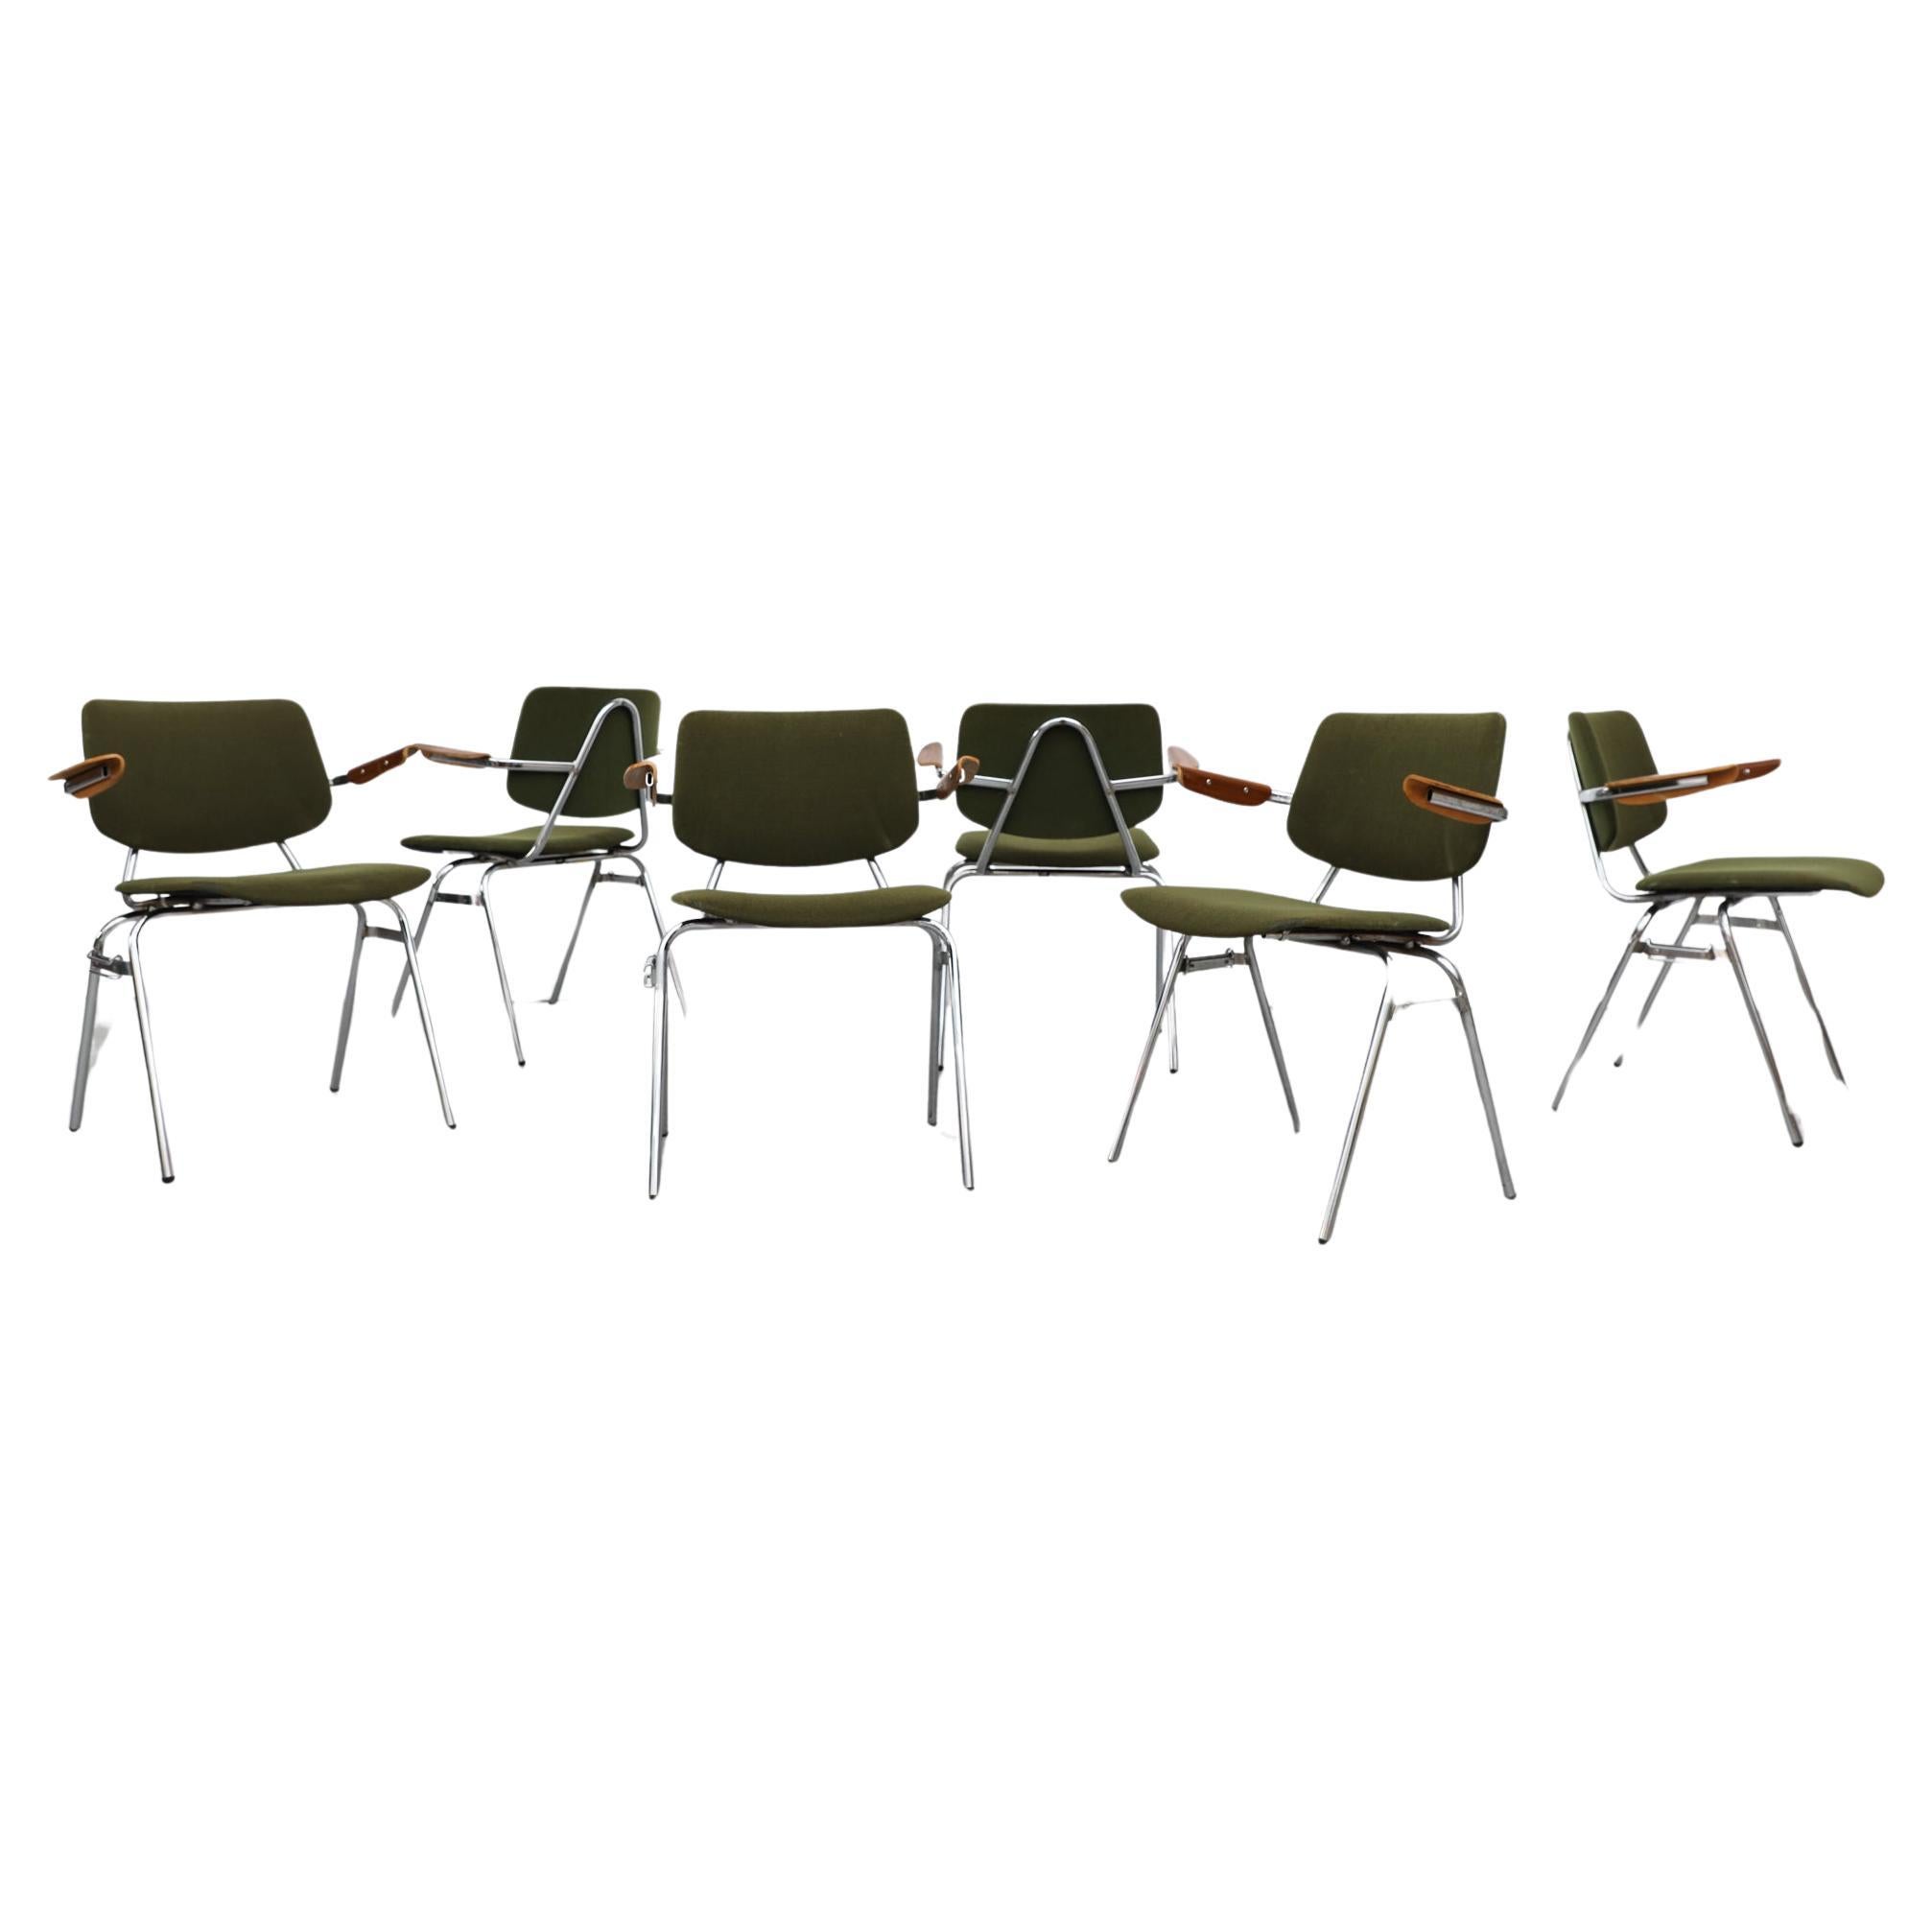 Kho Liang Ie 'Model 395 B/Z' Green Stacking Chairs with Armrests (Chaises empilables vertes avec accoudoirs) en vente